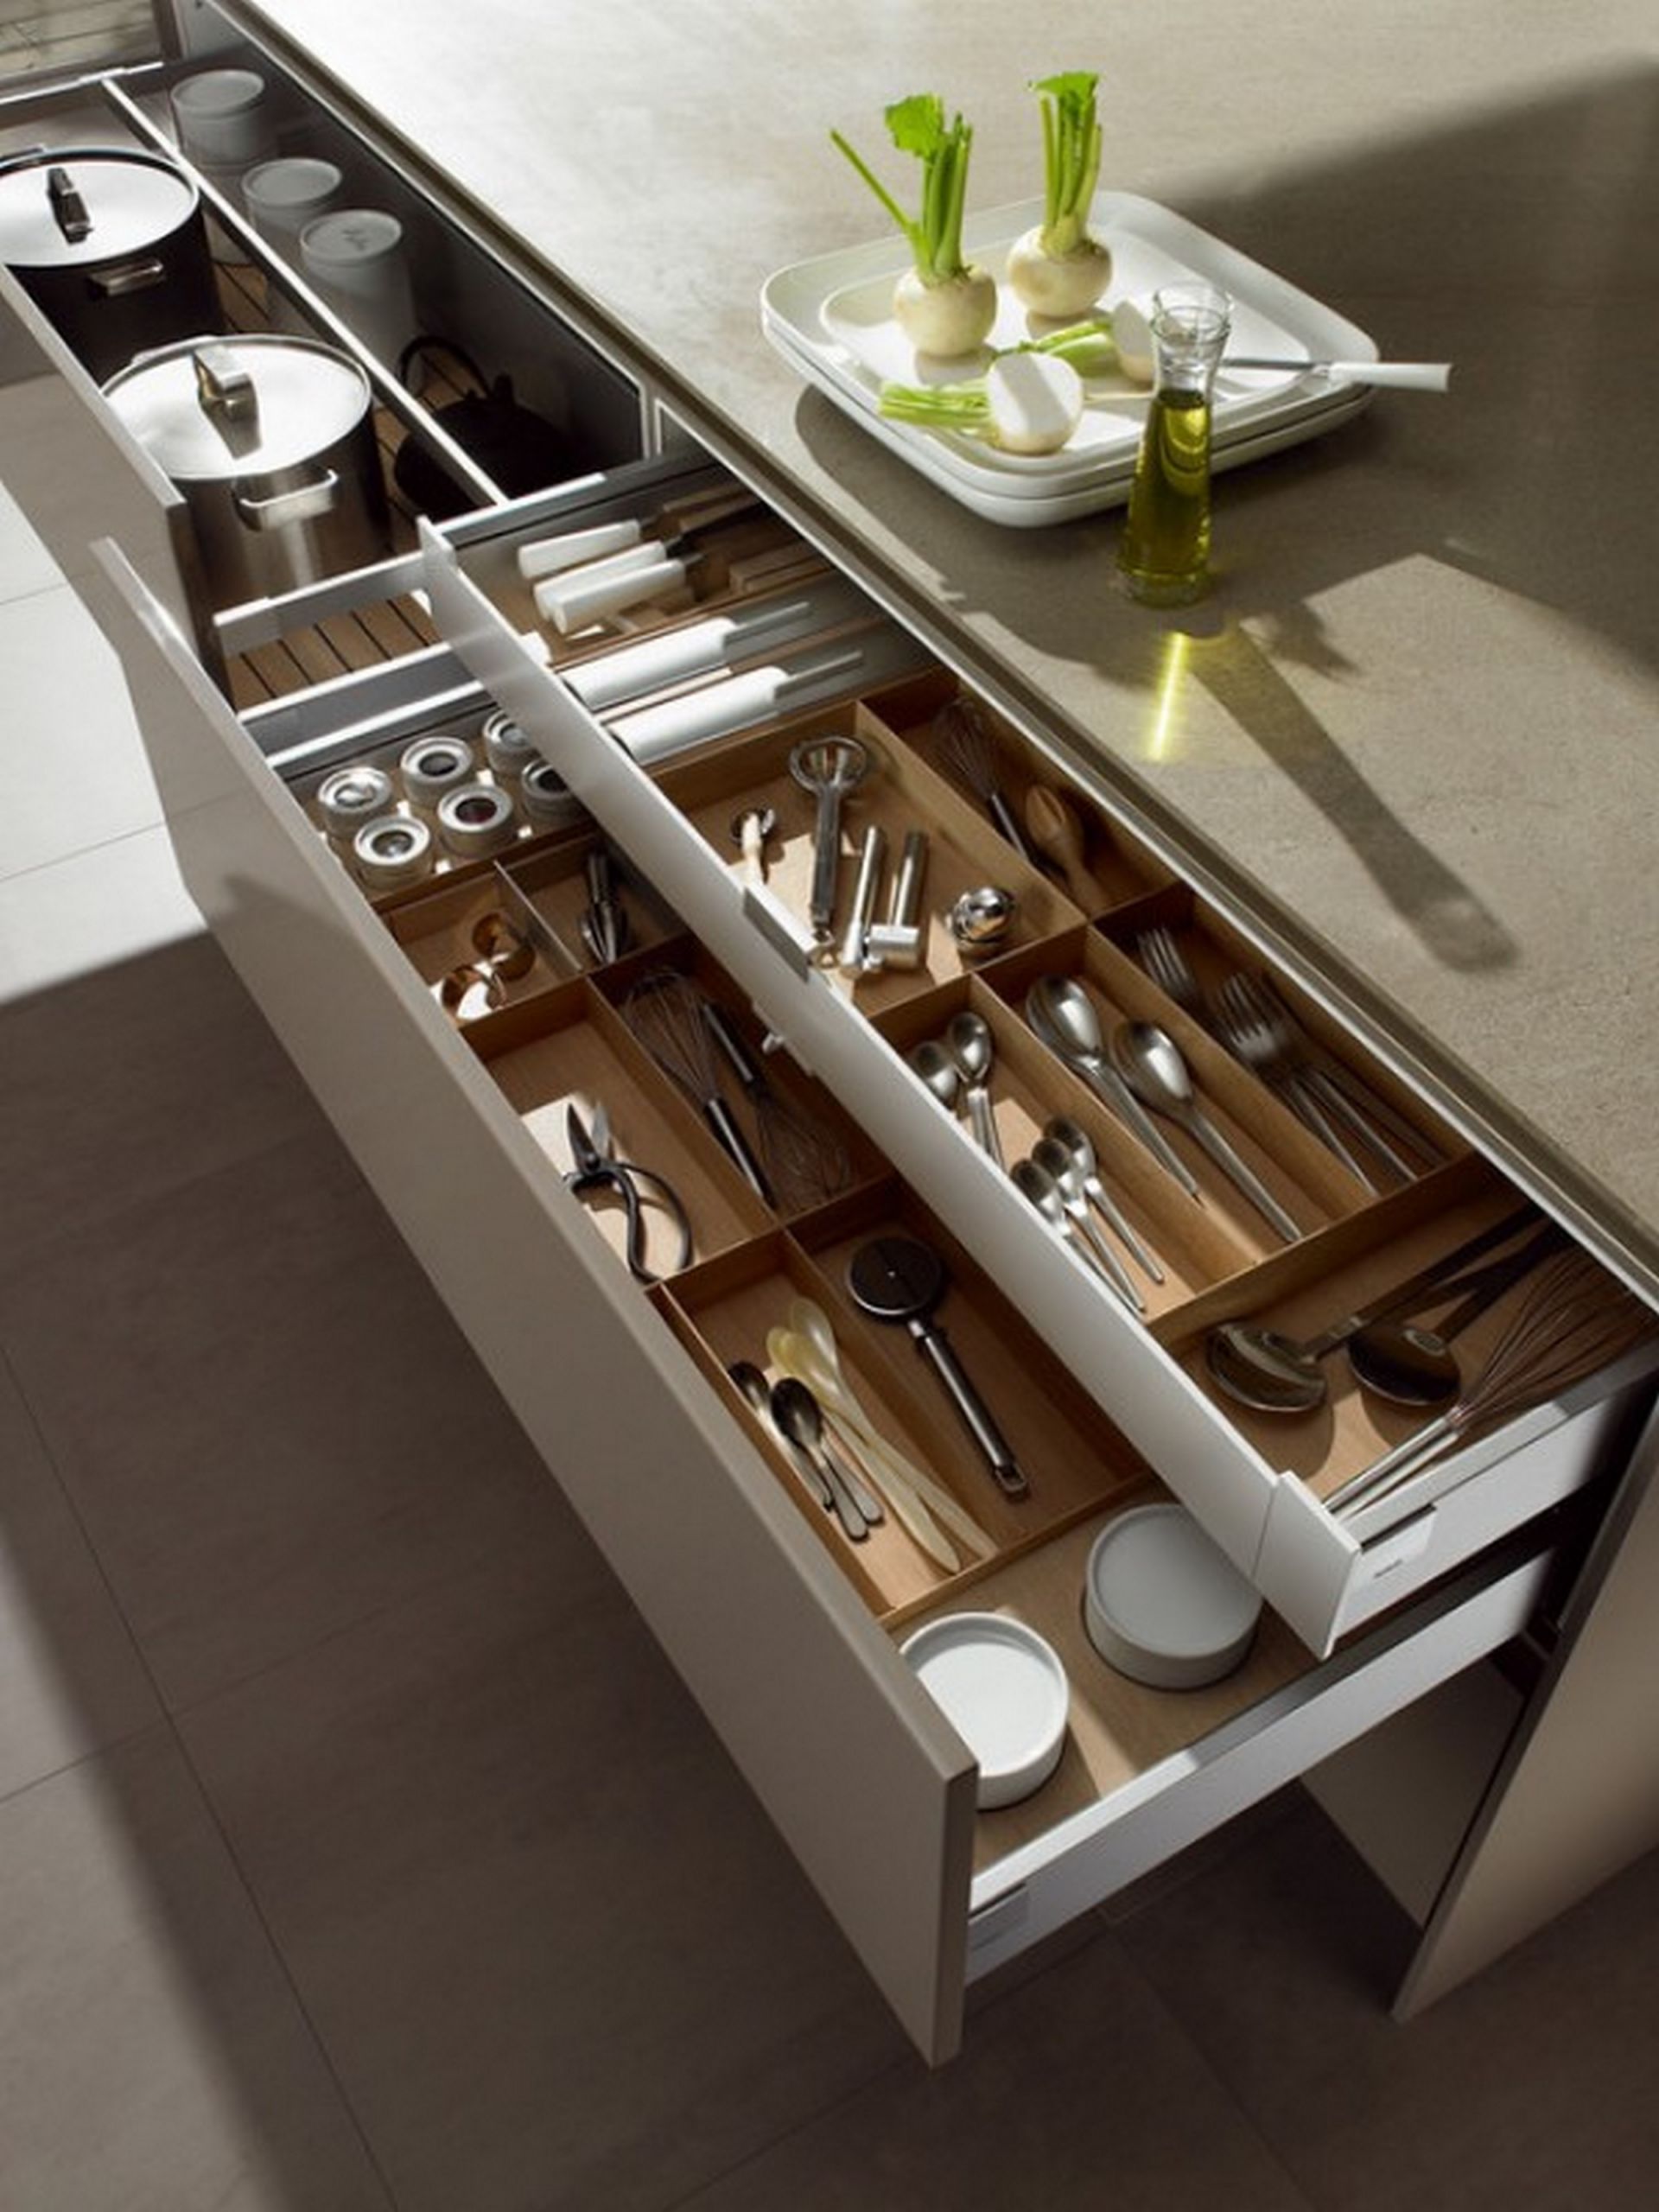 Drawer Organizers Kitchen
 Tips for Perfectly Organized Kitchen Drawers